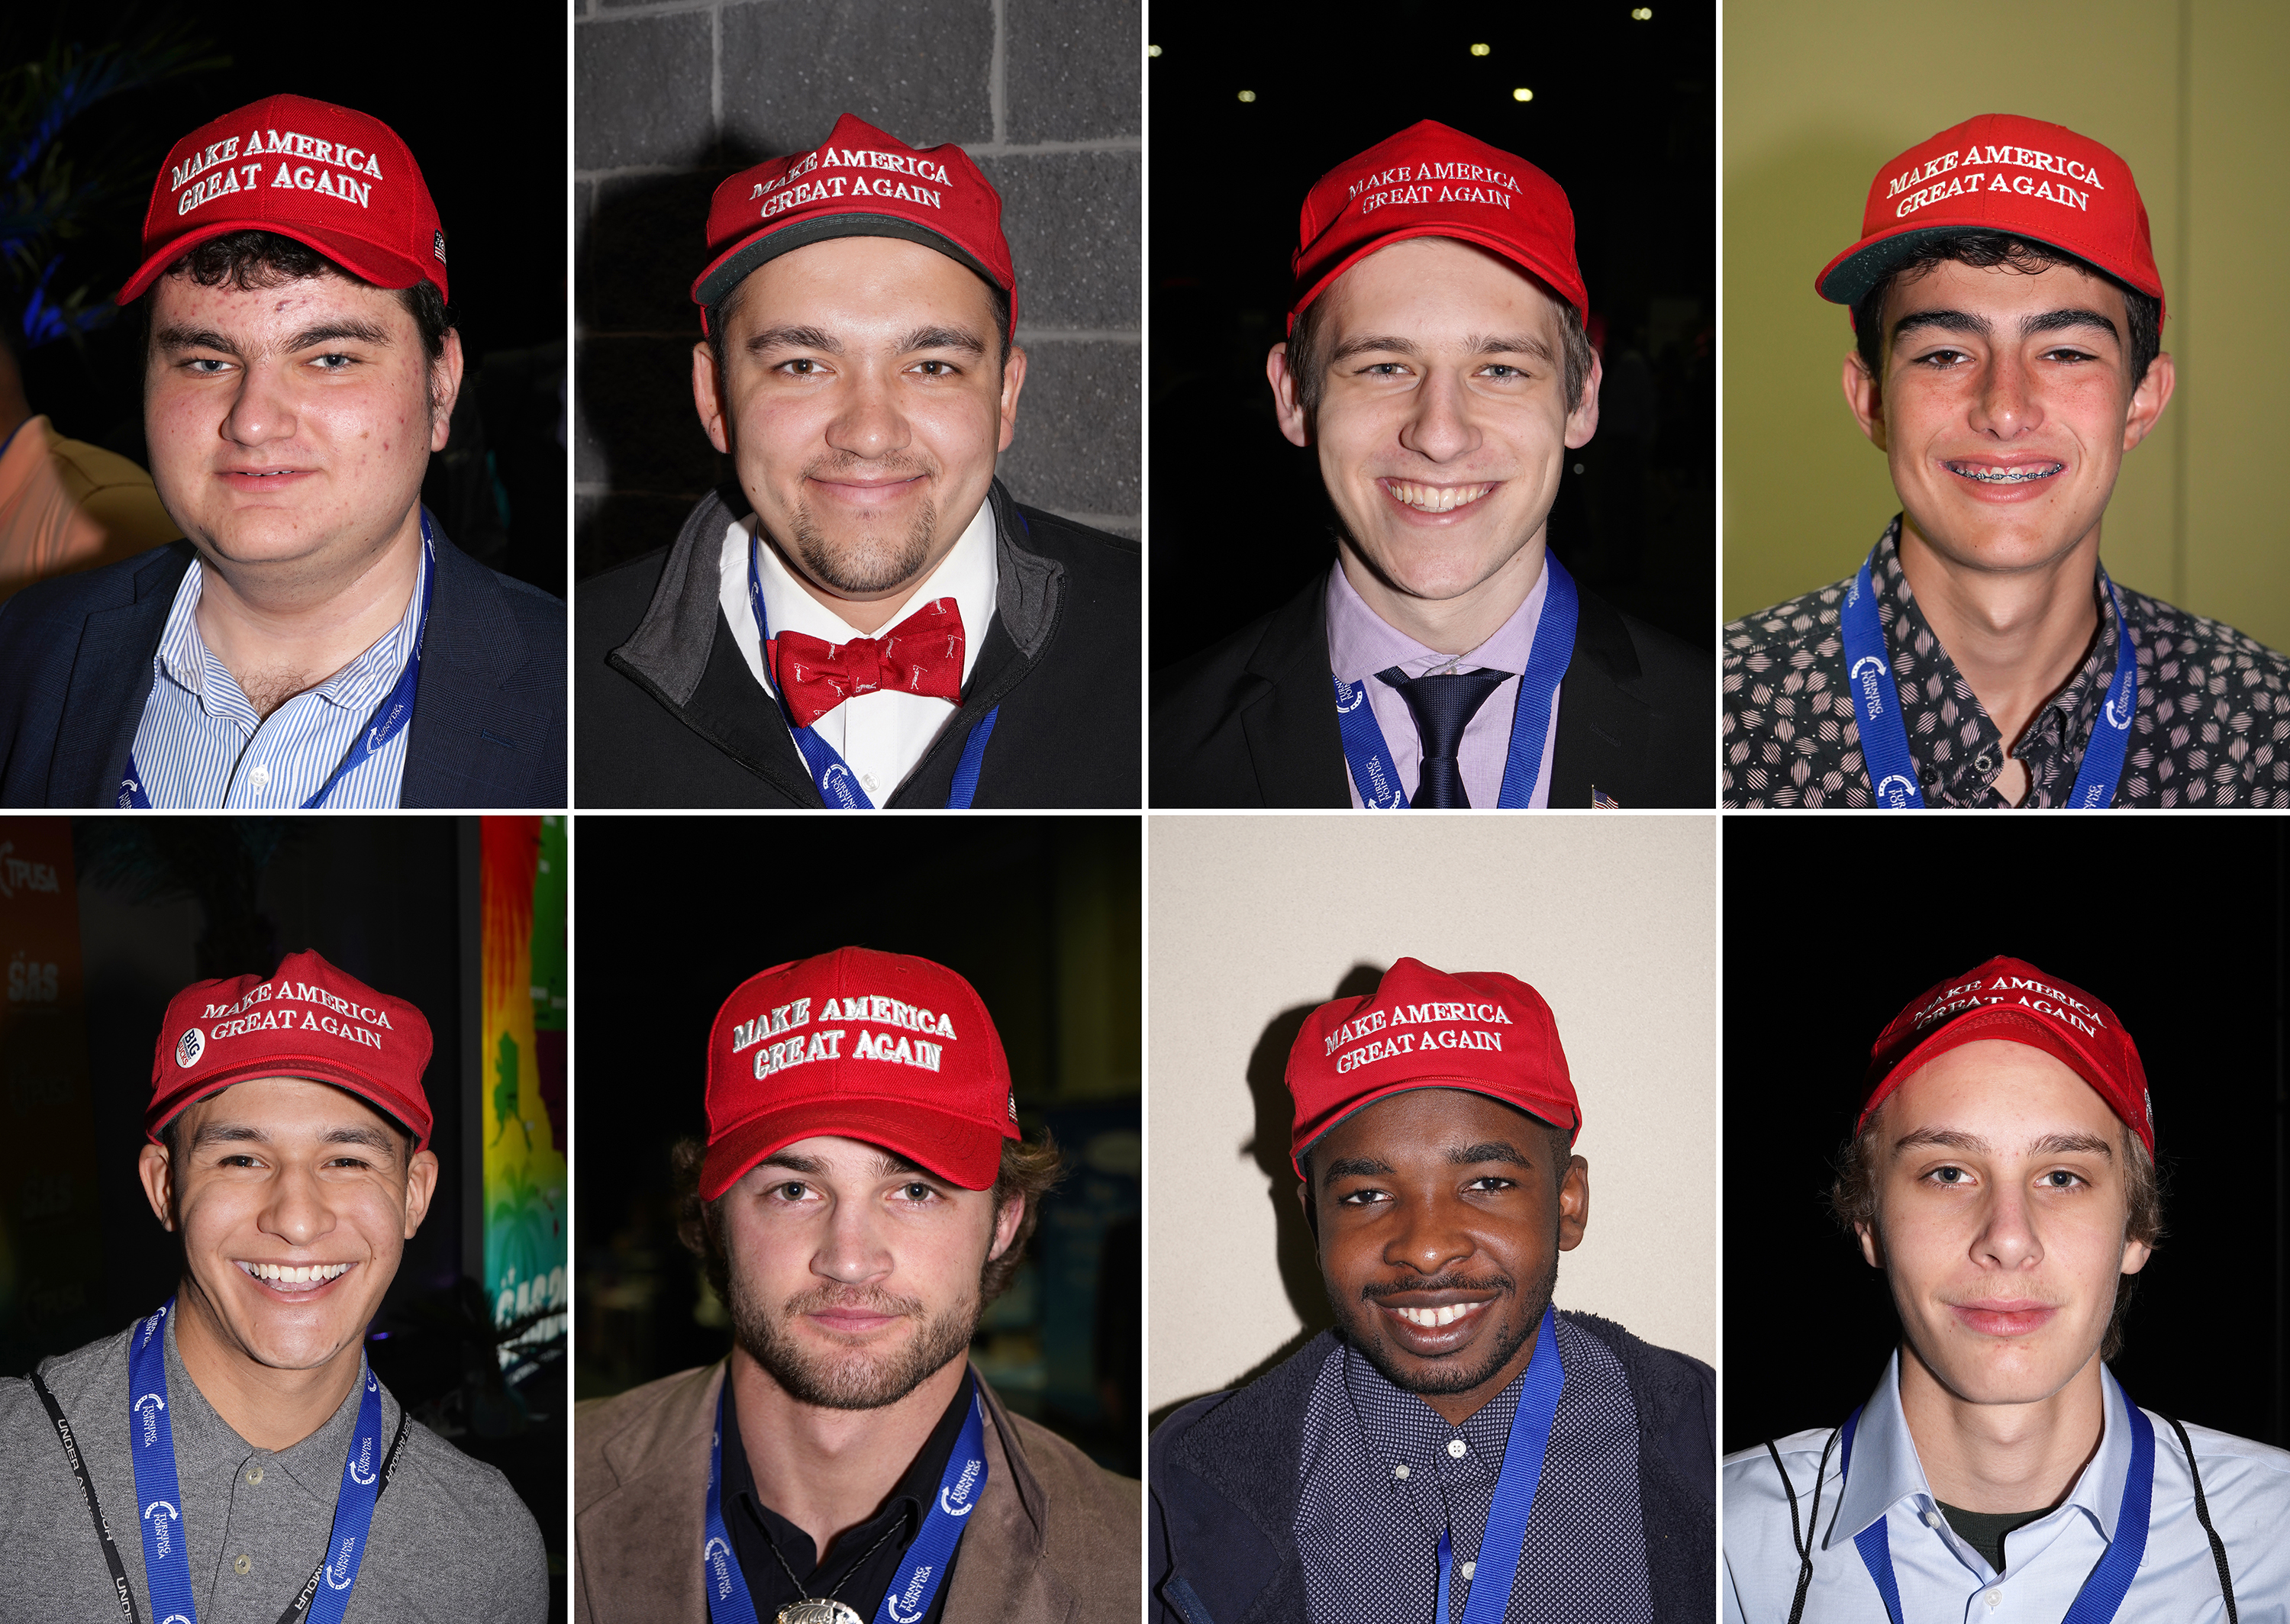 A grid of young people wearing MAGA hats.